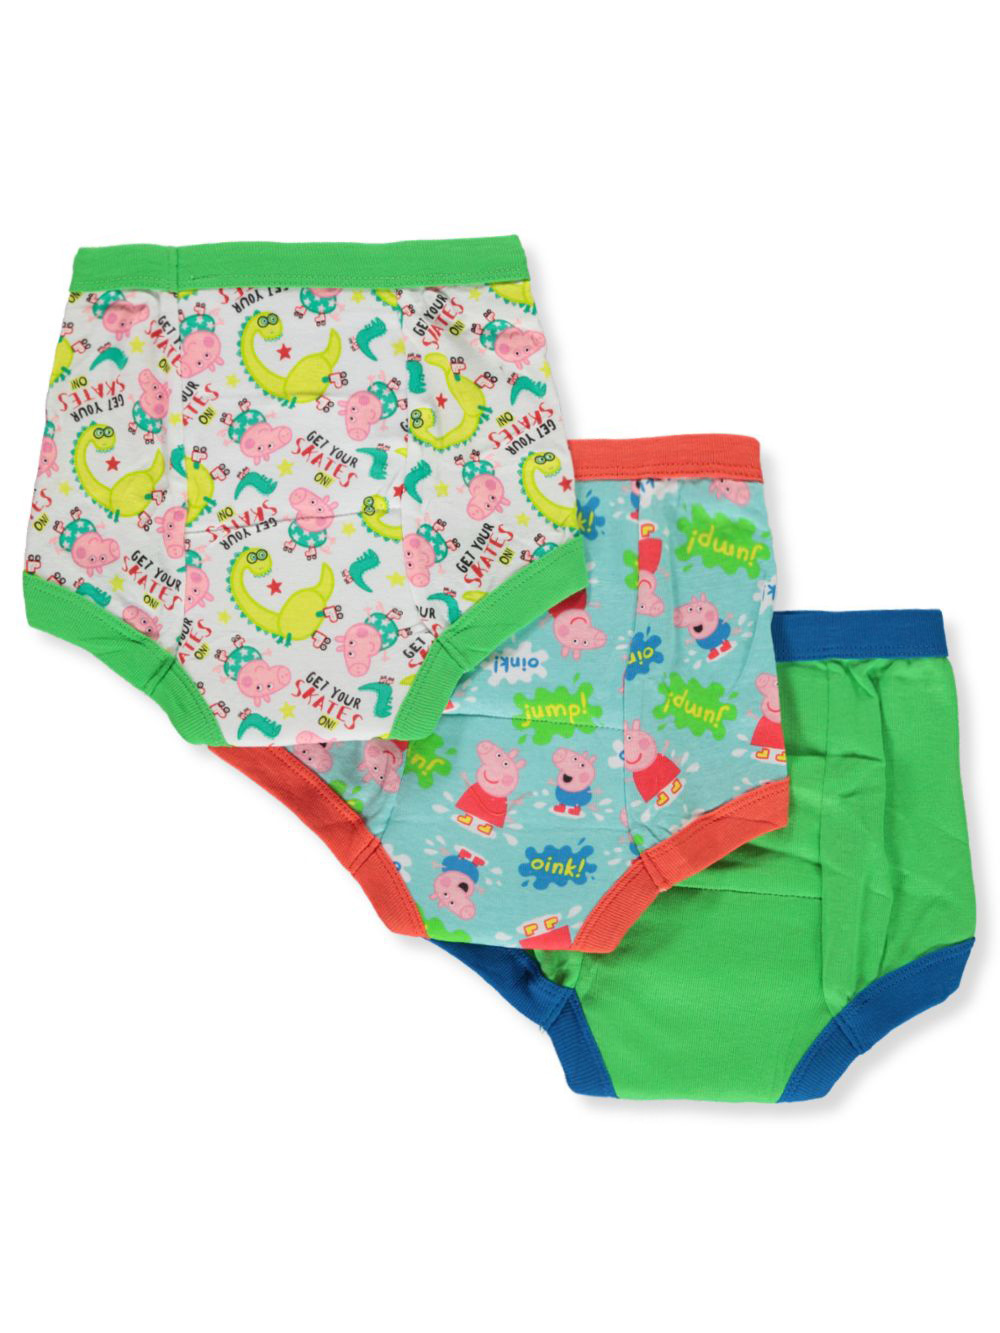 NEW Peppa Pig Toddler Girls' 3pk Training Pant Assorted 2T FREE SHIPPING 